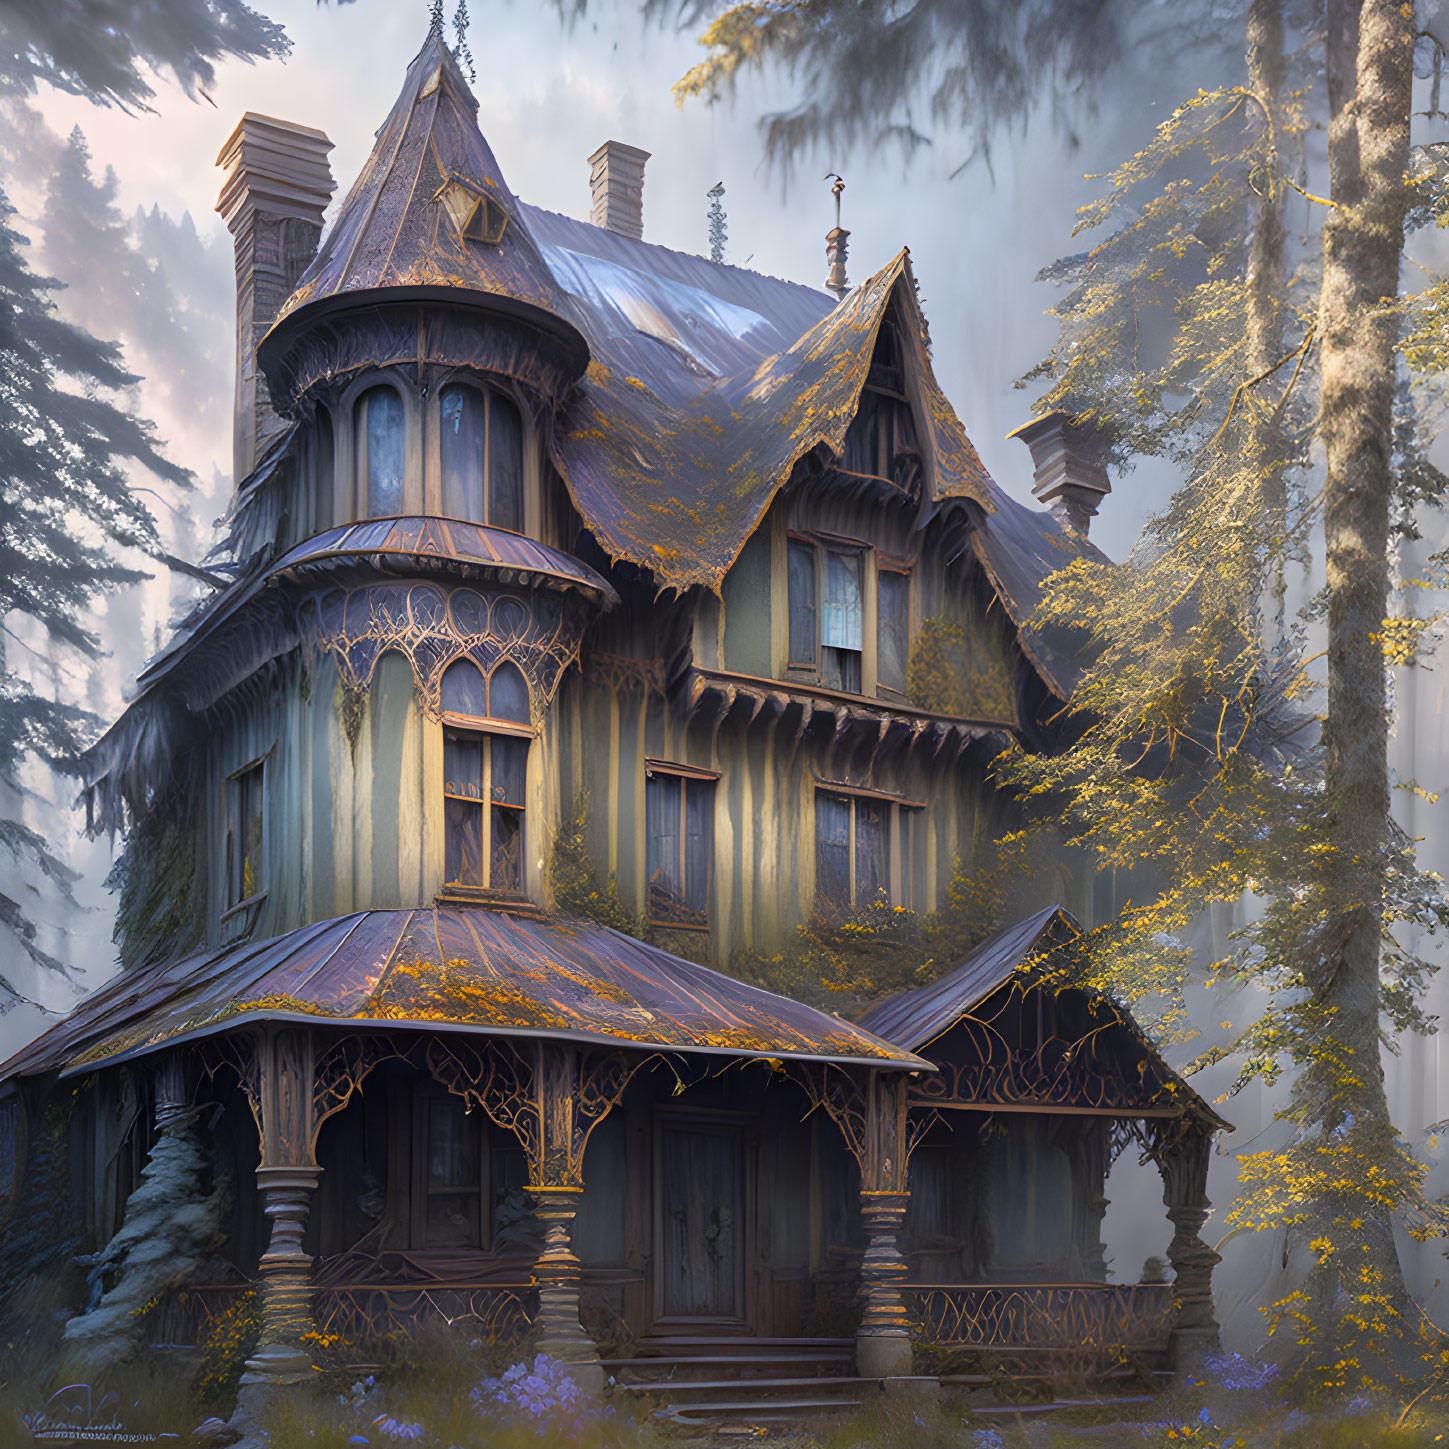 Victorian House with Ornate Trimmings in Misty Forest